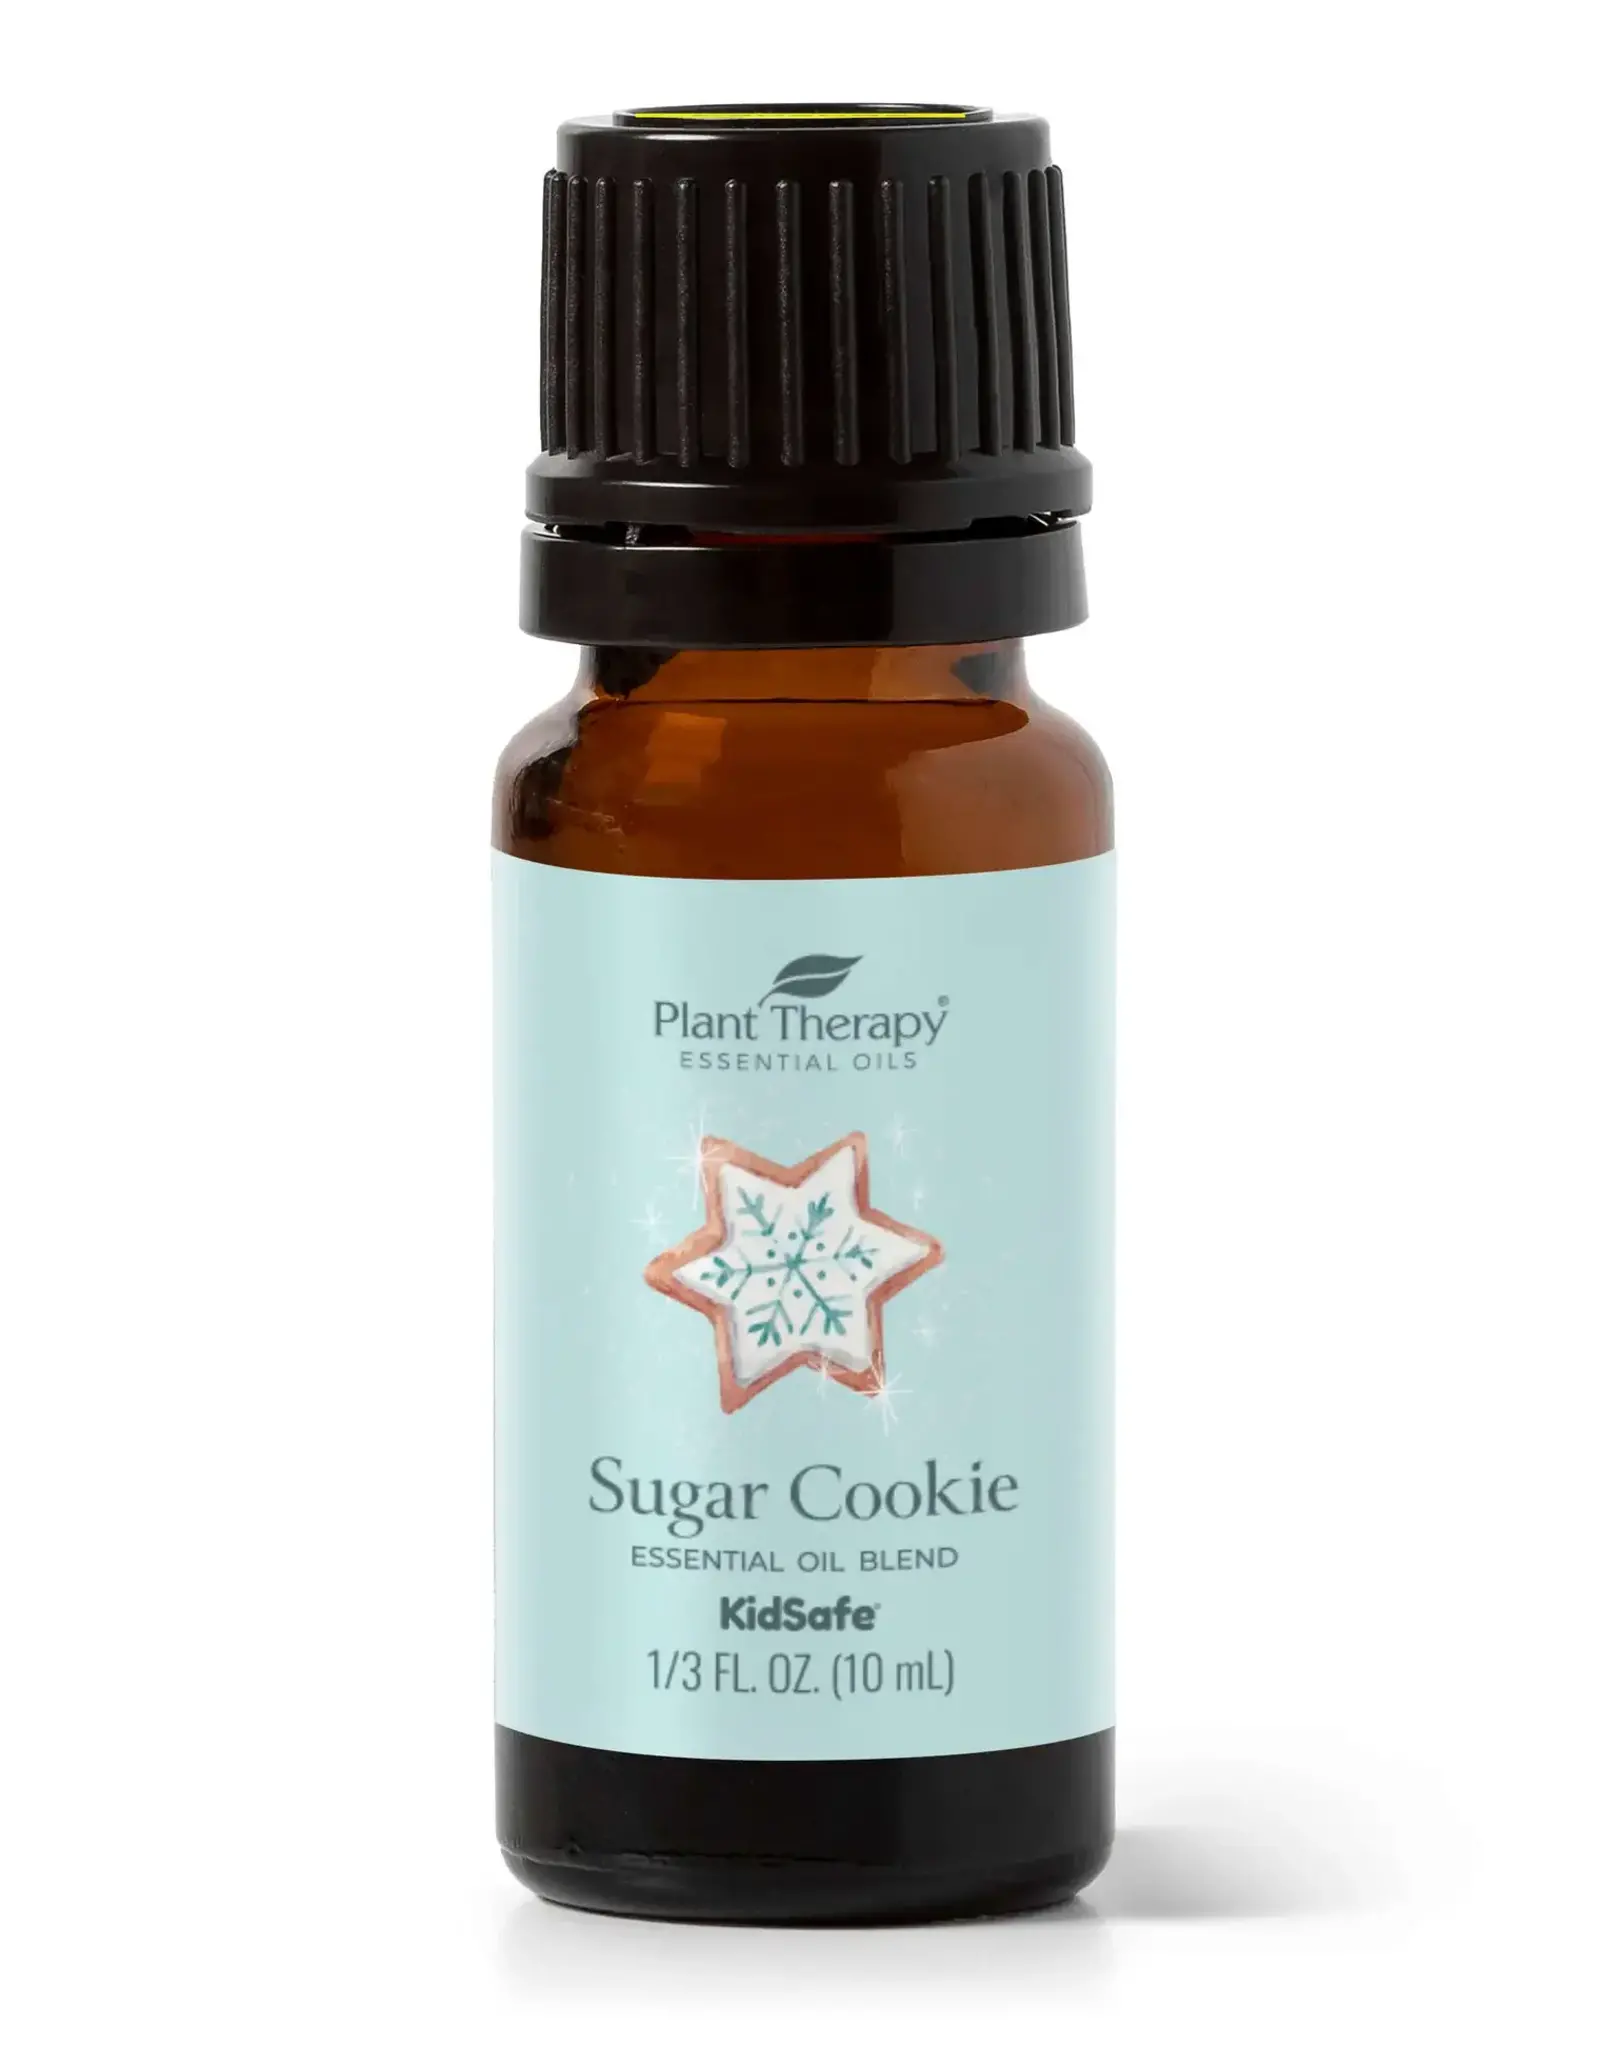 Plant Therapy Sugar Cookie Essential Oil Blend- 10ml